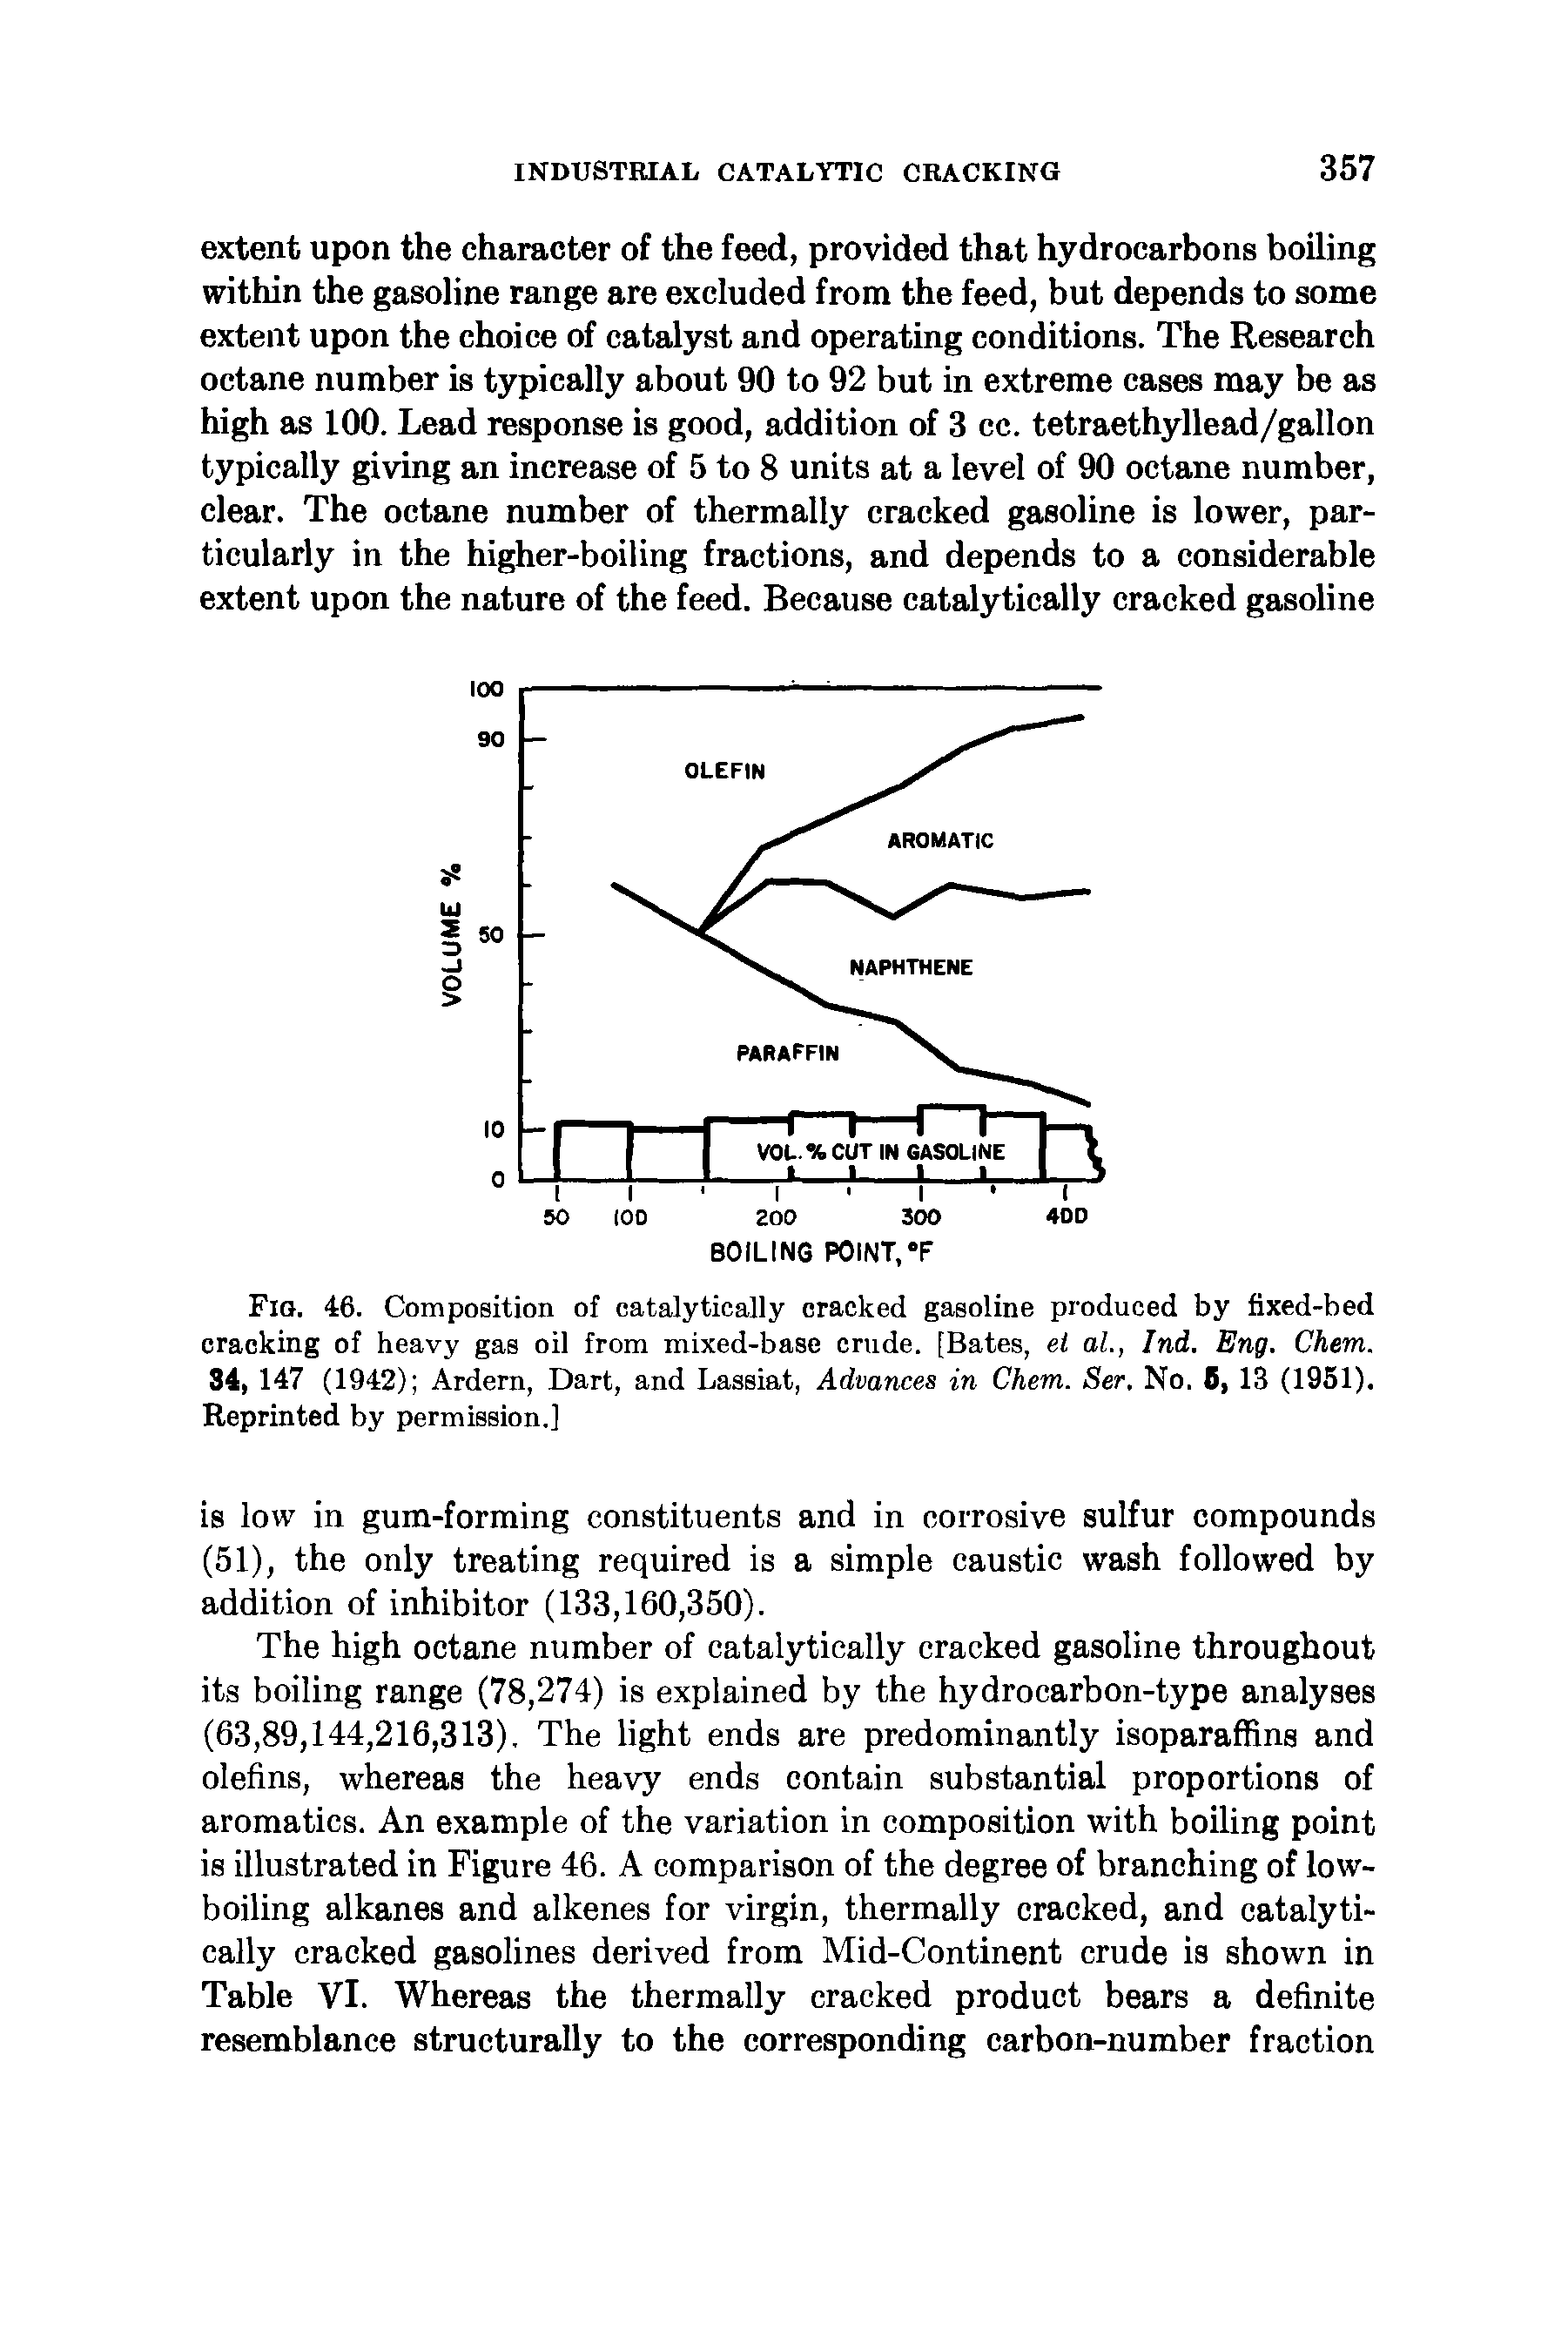 Fig. 46. Composition of catalytically cracked gasoline produced by fixed-bed cracking of heavy gas oil from mixed-base crude. [Bates, ei ah, Ind. Eng. Chem. 34, 147 (1942) Ardern, Dart, and Lassiat, Advances in Chem. Ser. No. 6, 13 (1951). Reprinted by permission.]...